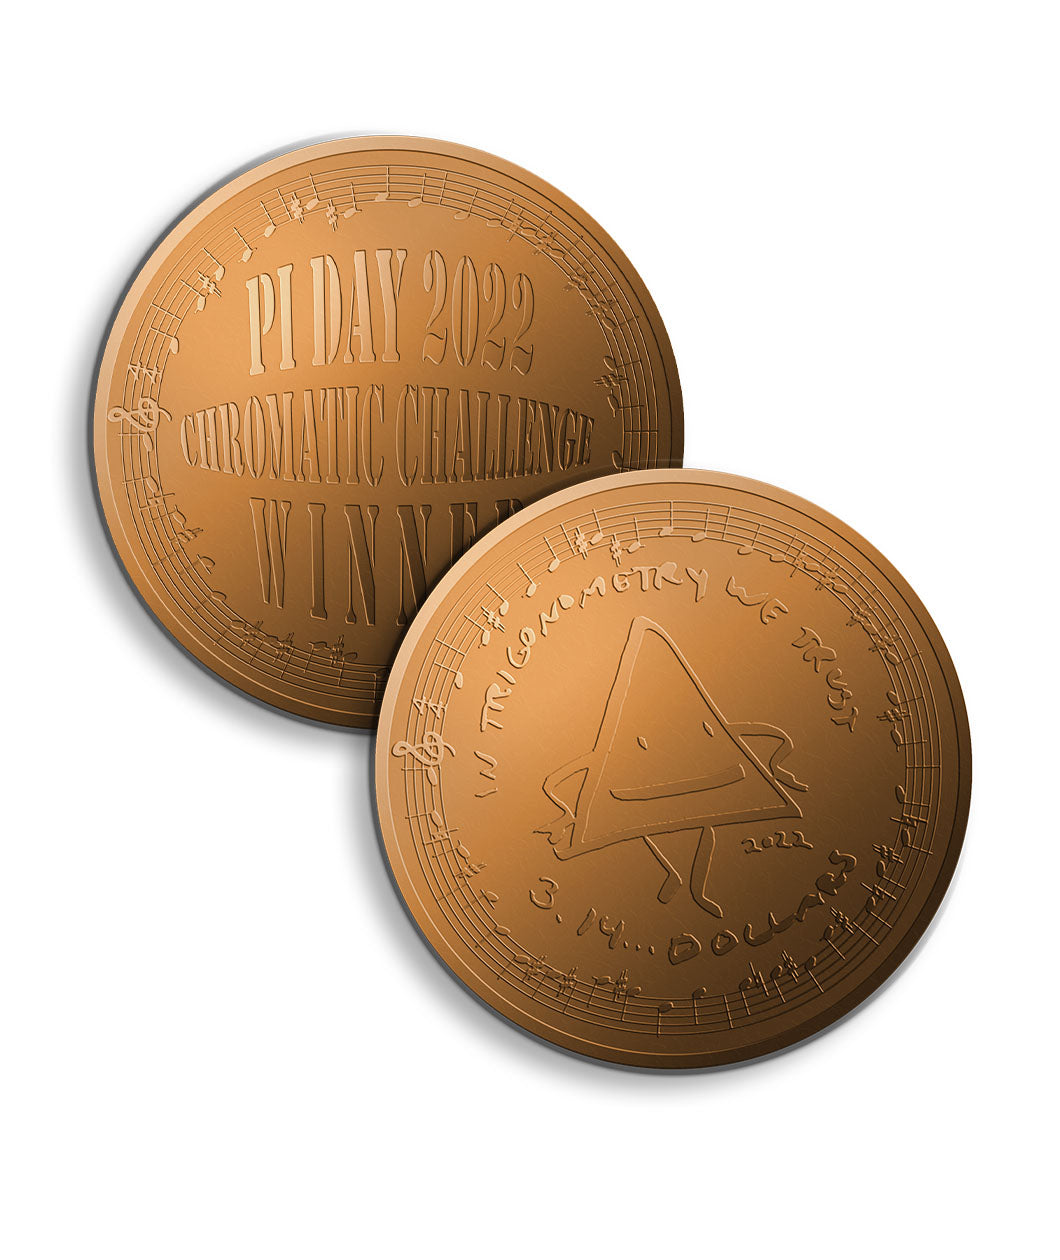 Front and back of Pi Day 2022 bronze coin. Front: A cartoon drawing of a triangle. "In trigonometry we trust 3.14 dollars” is written around the triangle in handwritten font, surrounded by a circle of music notes and bars.  Back: “Pi Day 2022 Chromatic Challenge Winner” is written in serif font on back in warped text surrounded by a circle of music notes and bars.